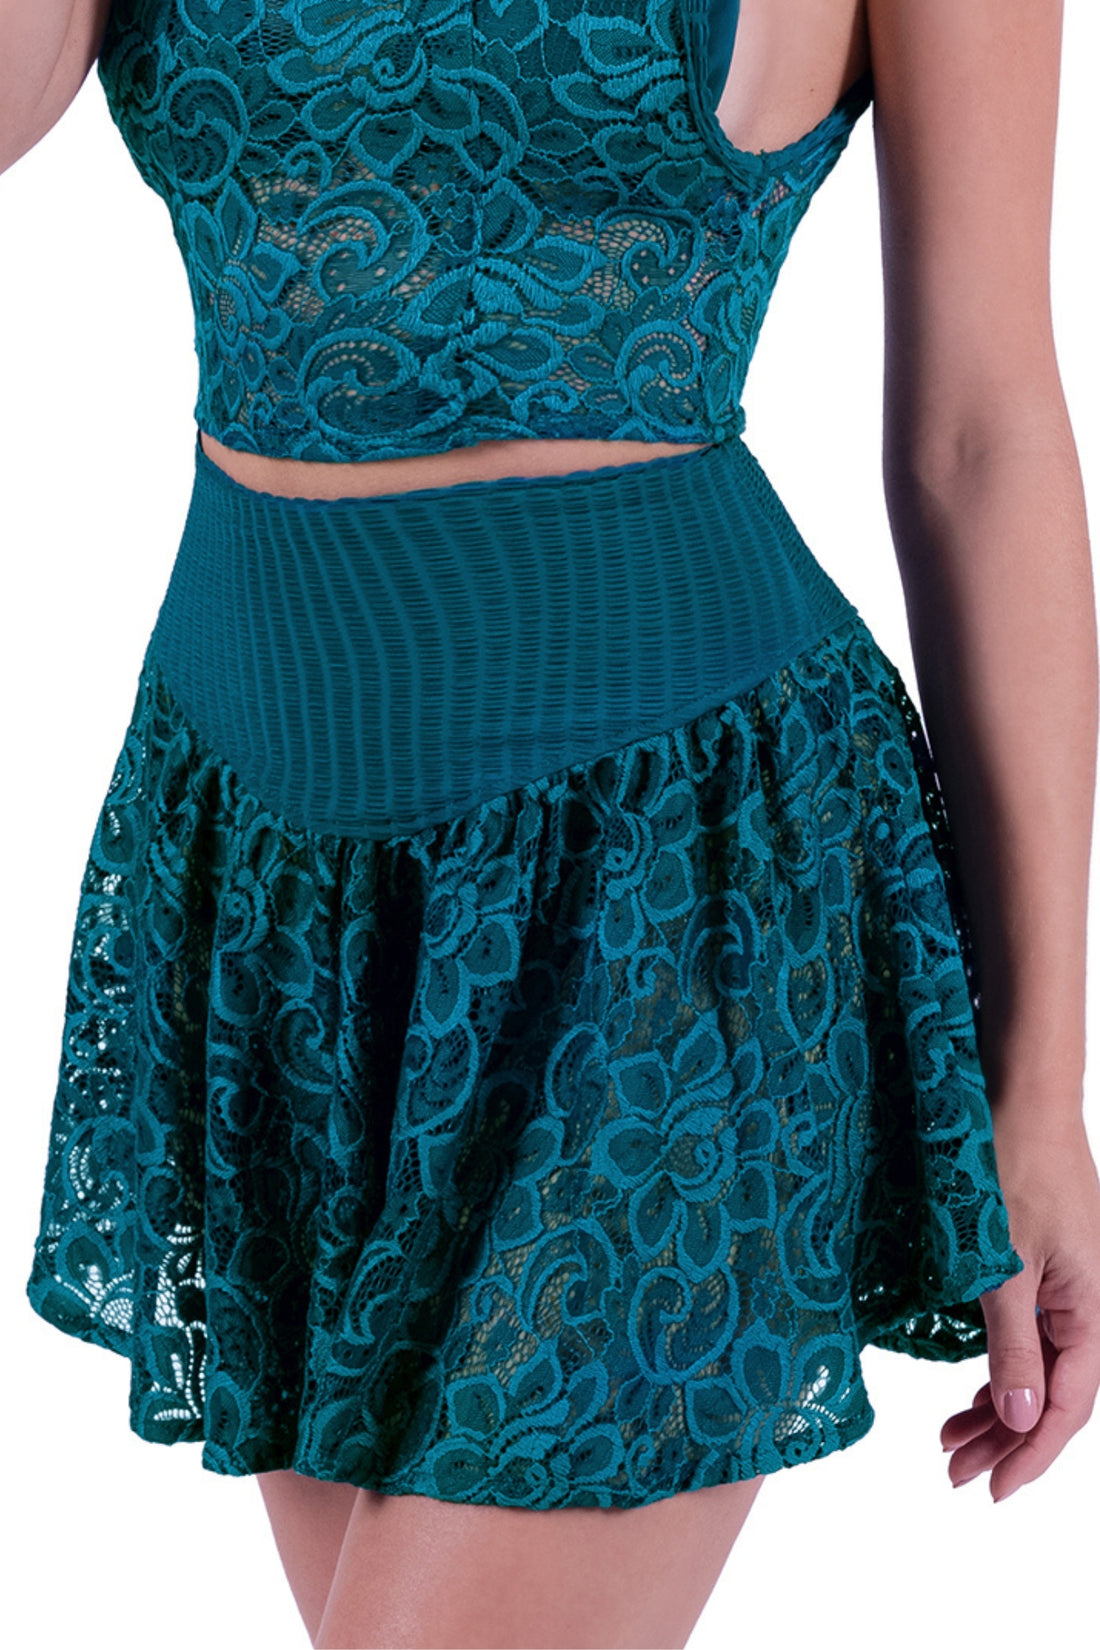 Skirt Lace Teal